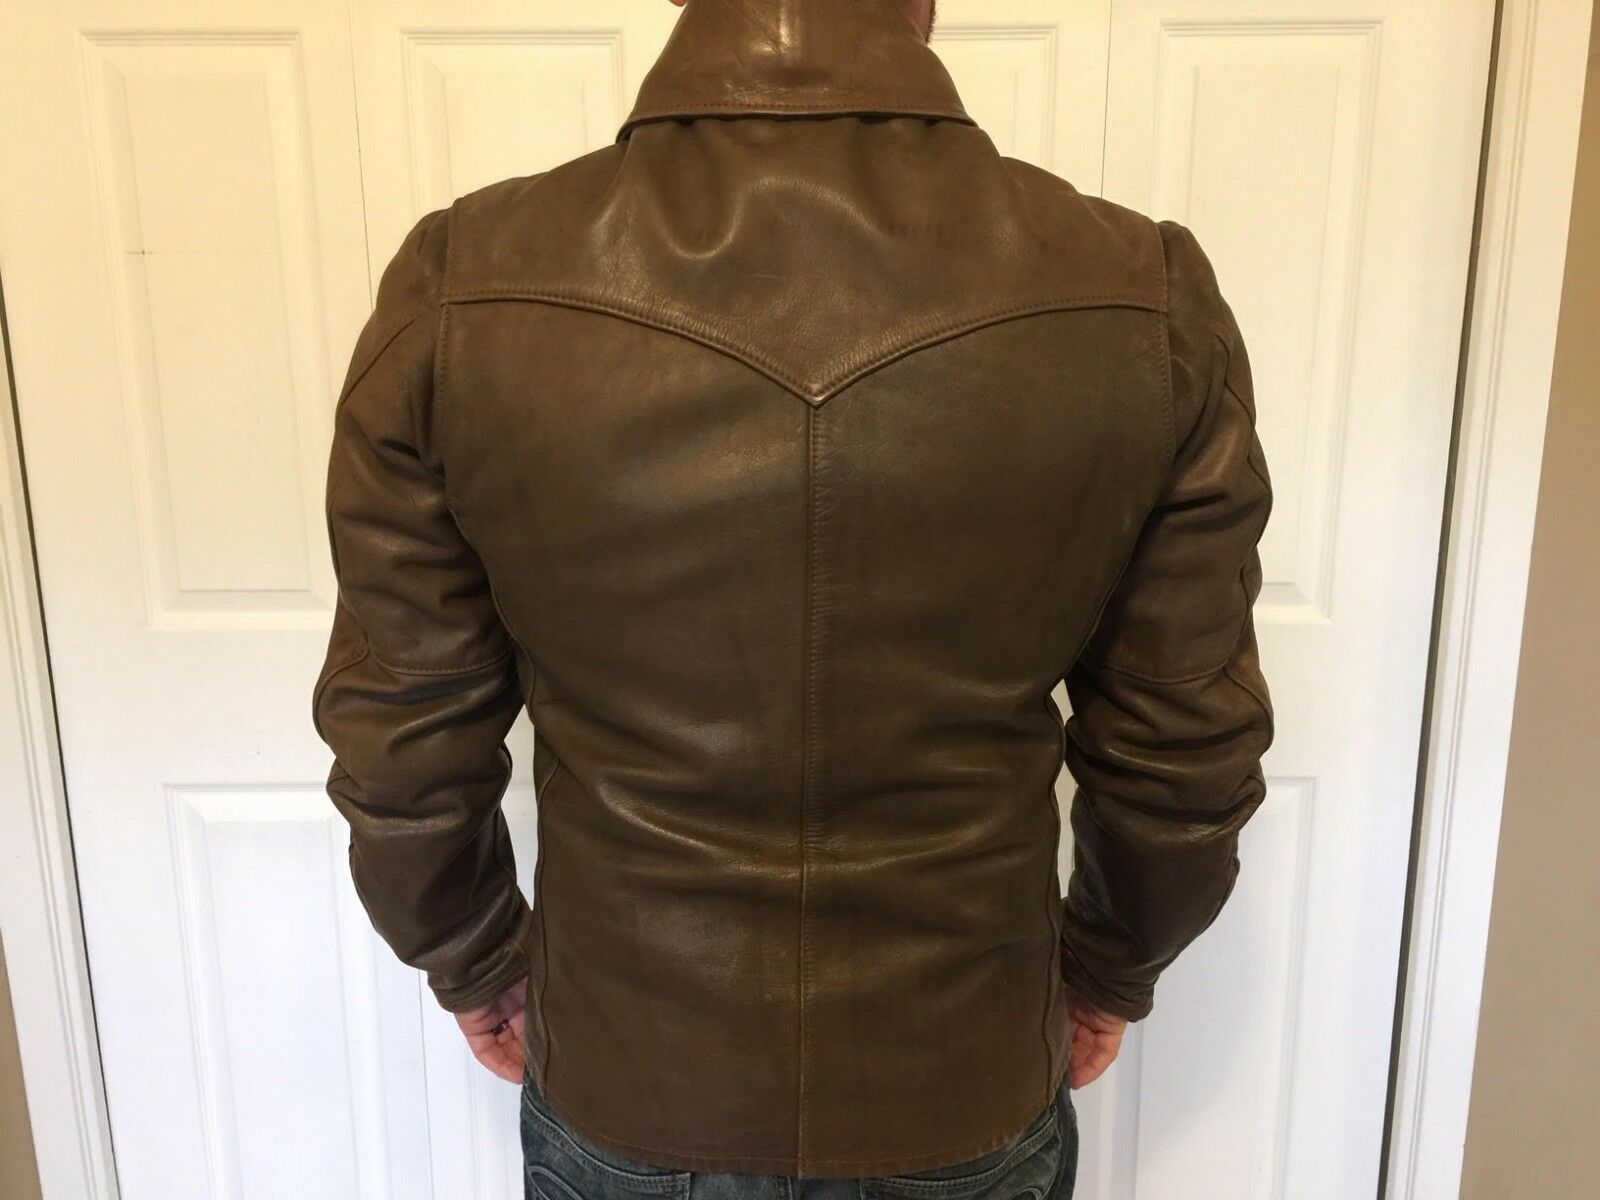 Do you know the brand or age of this jacket? | Vintage Leather Jackets ...